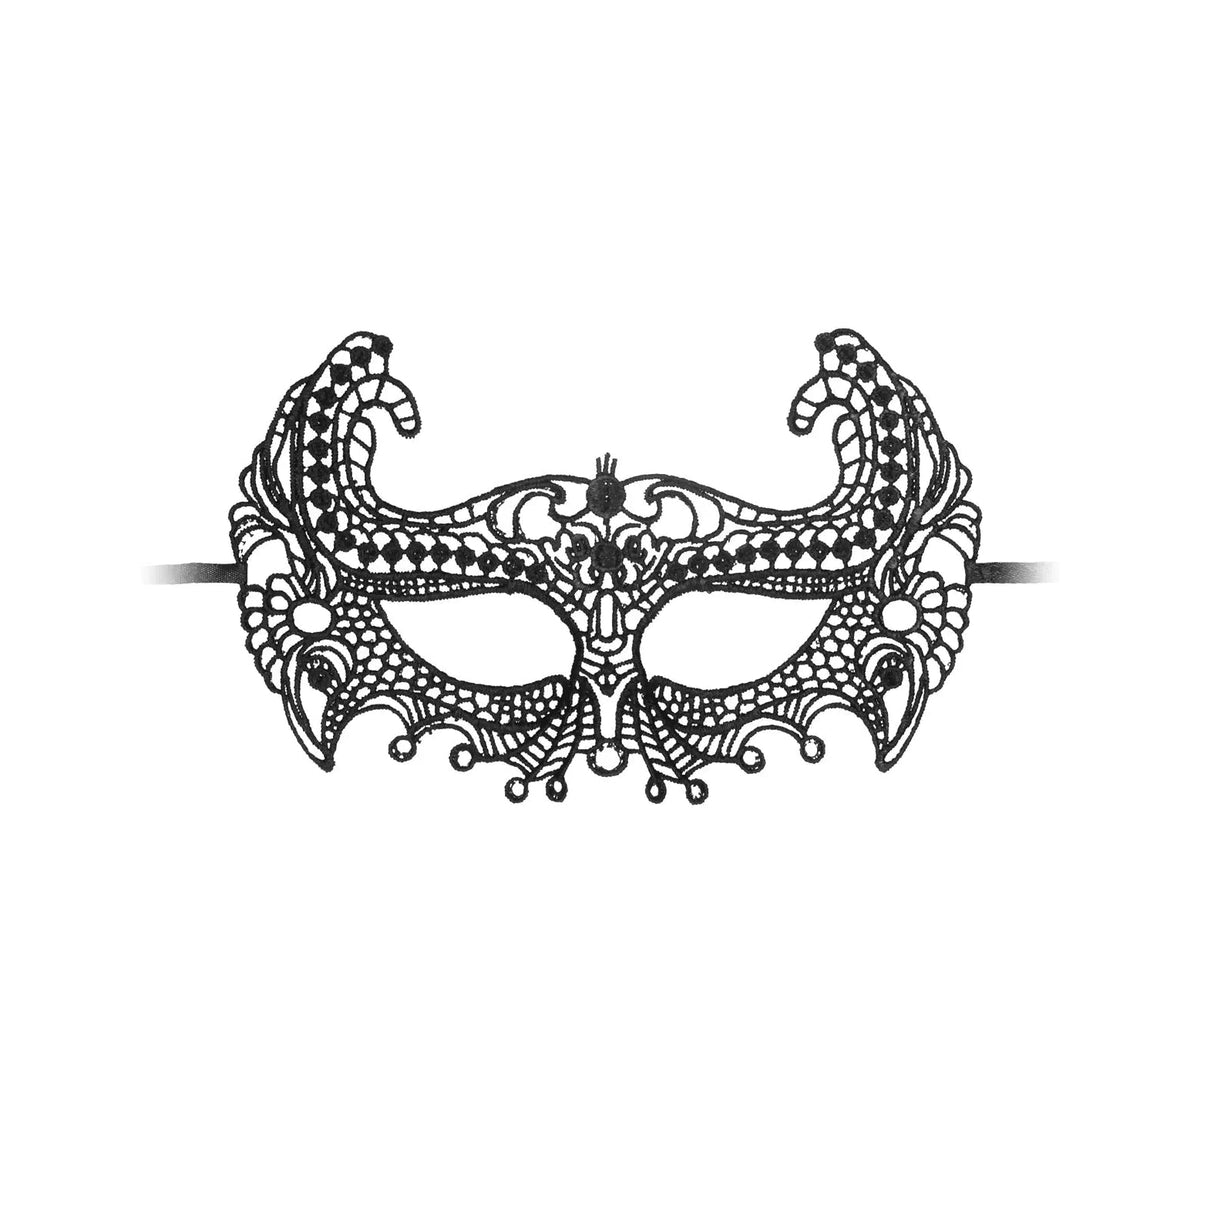 Shots Ouch Black & White Lace Eye Mask